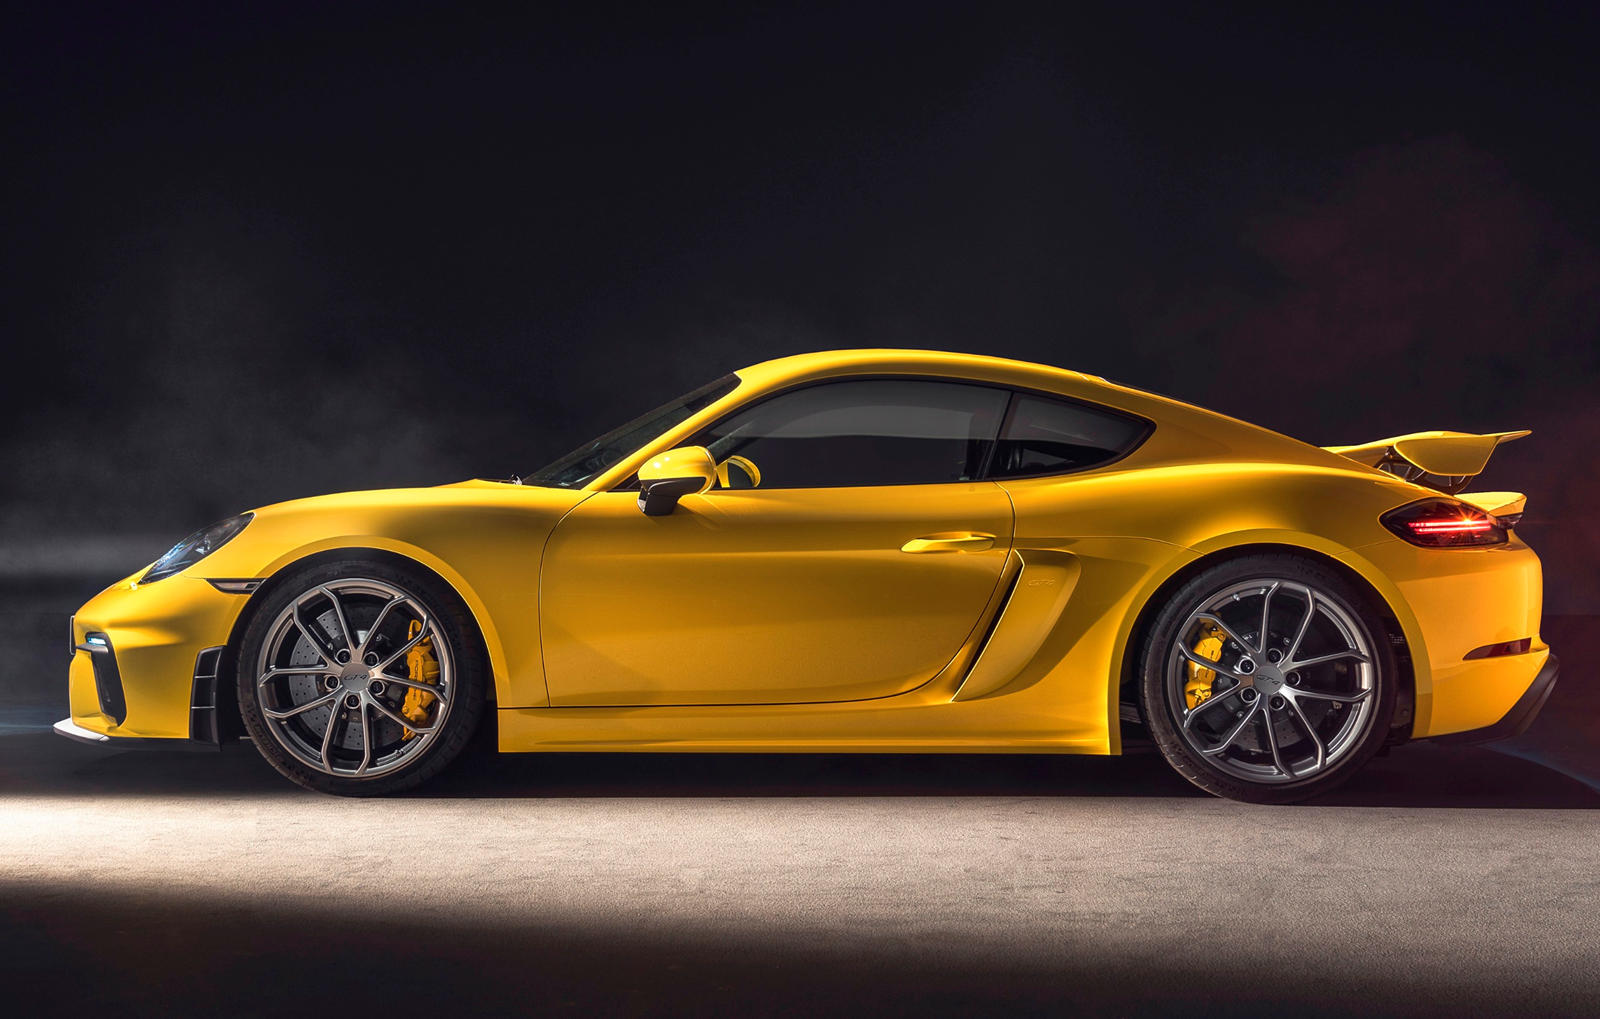 Say Hello To The 414-HP Porsche Cayman GT4 And 718 Spyder | CarBuzz